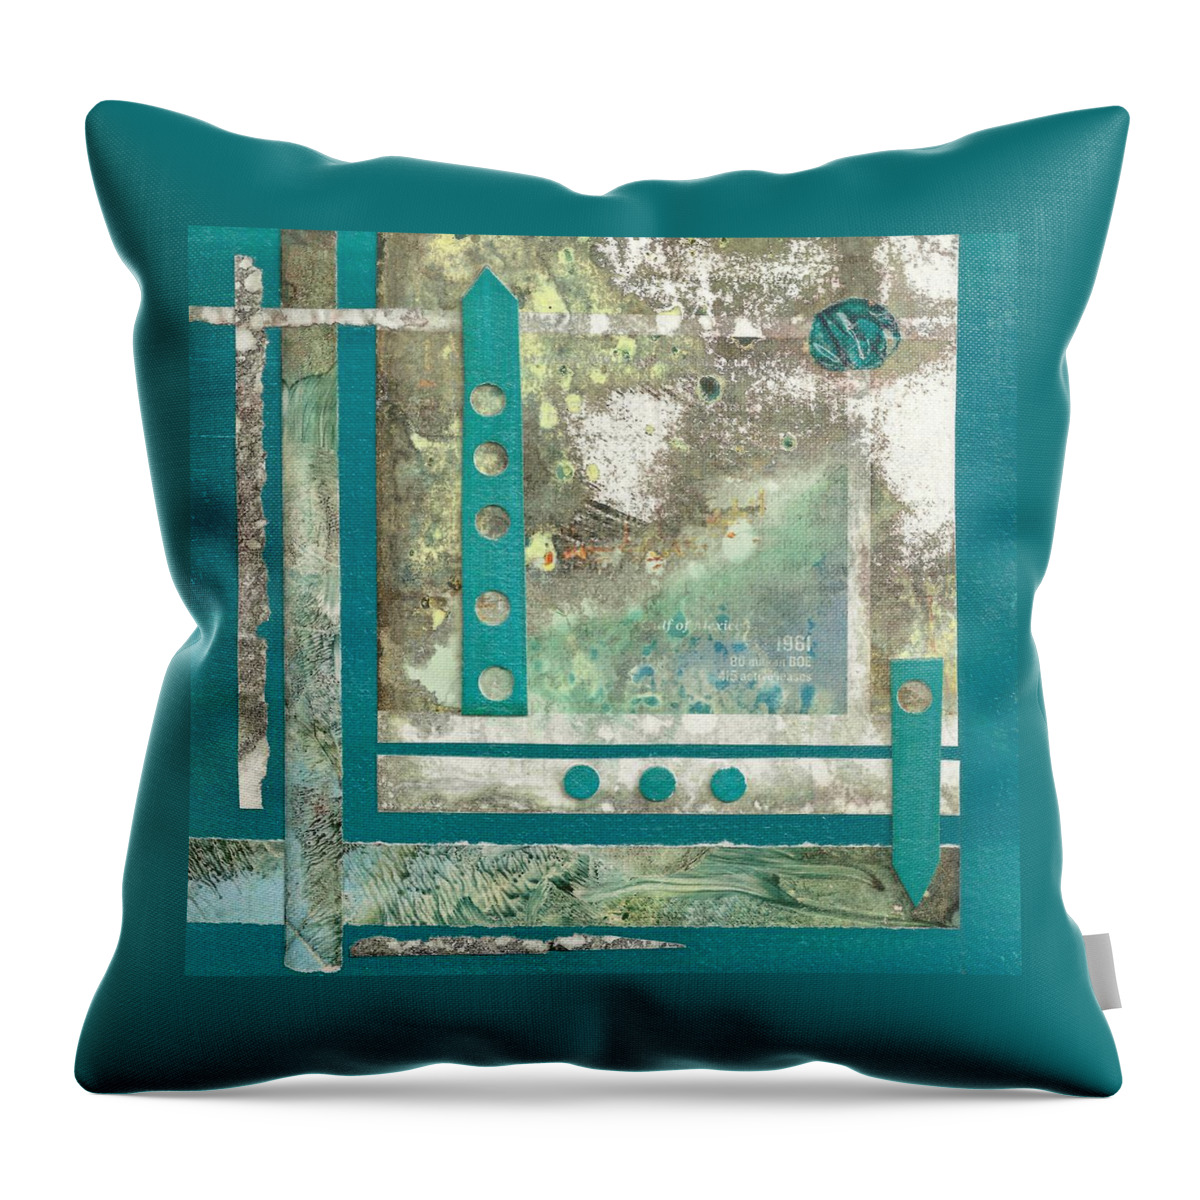 Arrows Throw Pillow featuring the mixed media 1961 by Sandra Lee Scott